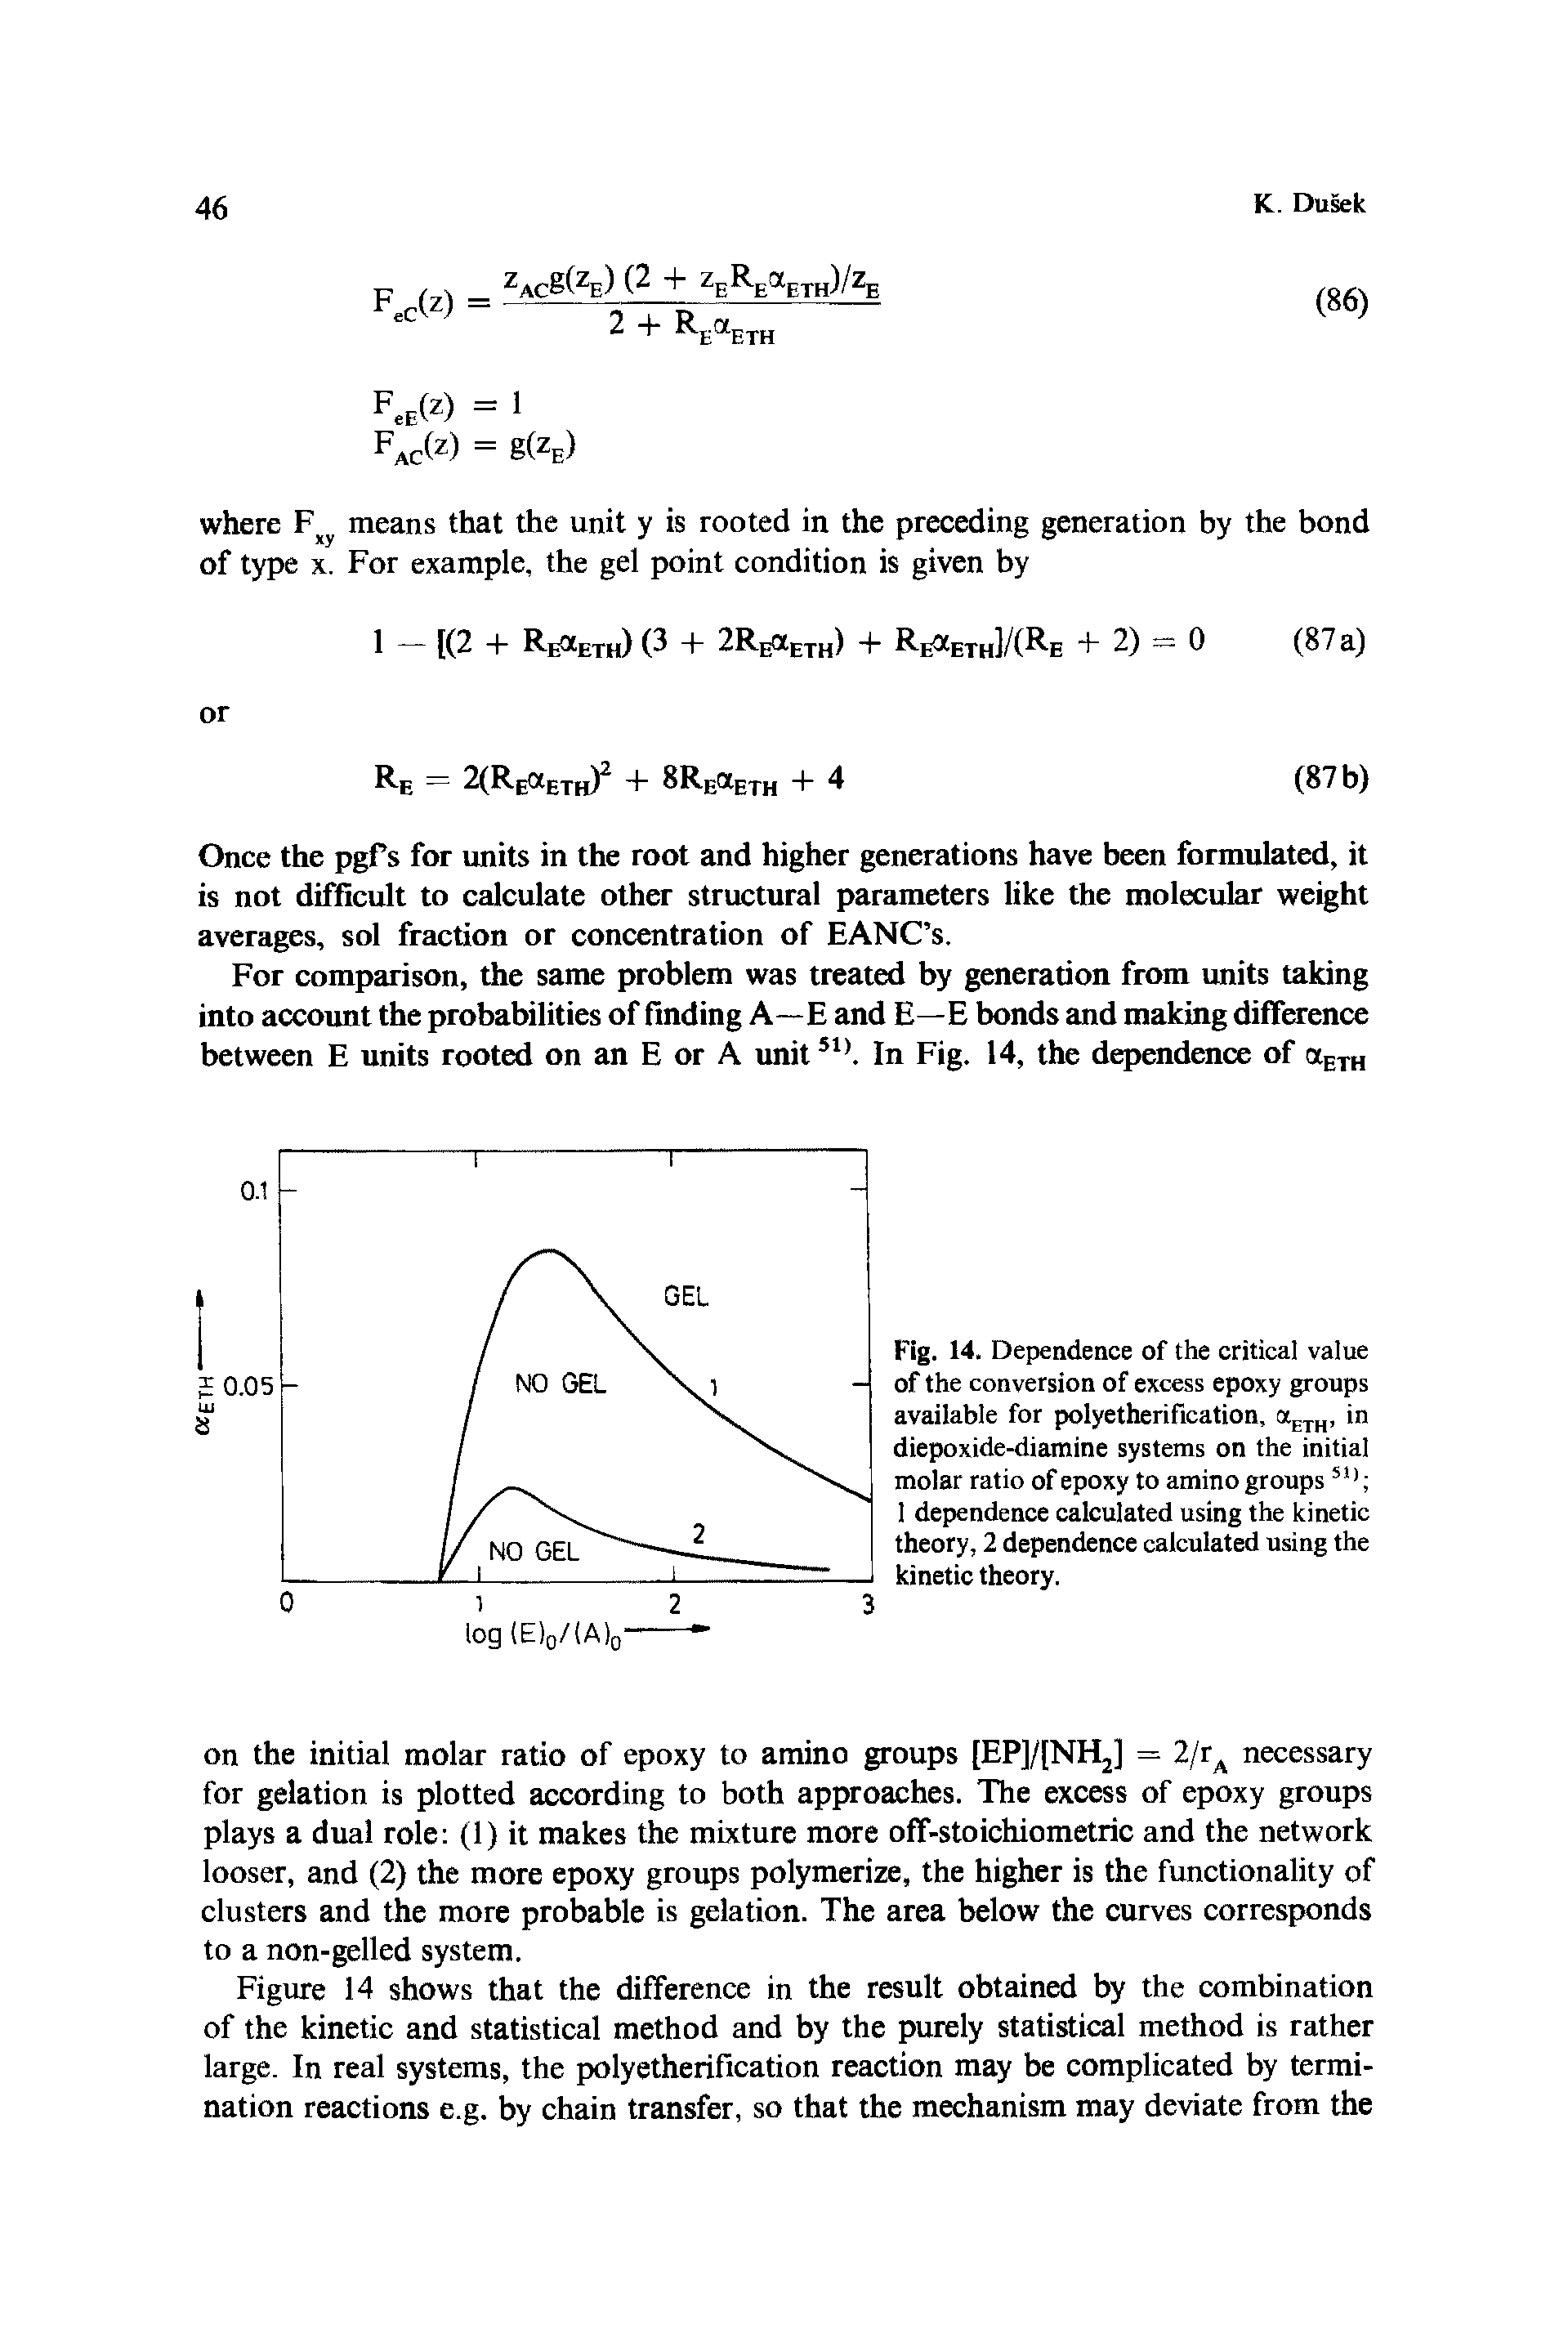 Fig. 14. Dependence of the critical value of the conversion of excess epoxy groups available for polyetherification, in diepoxide-diamine systems on the initial molar ratio of epoxy to amino groups 1 dependence calculated using the kinetic theory, 2 dependence calculated using the kinetic theory.